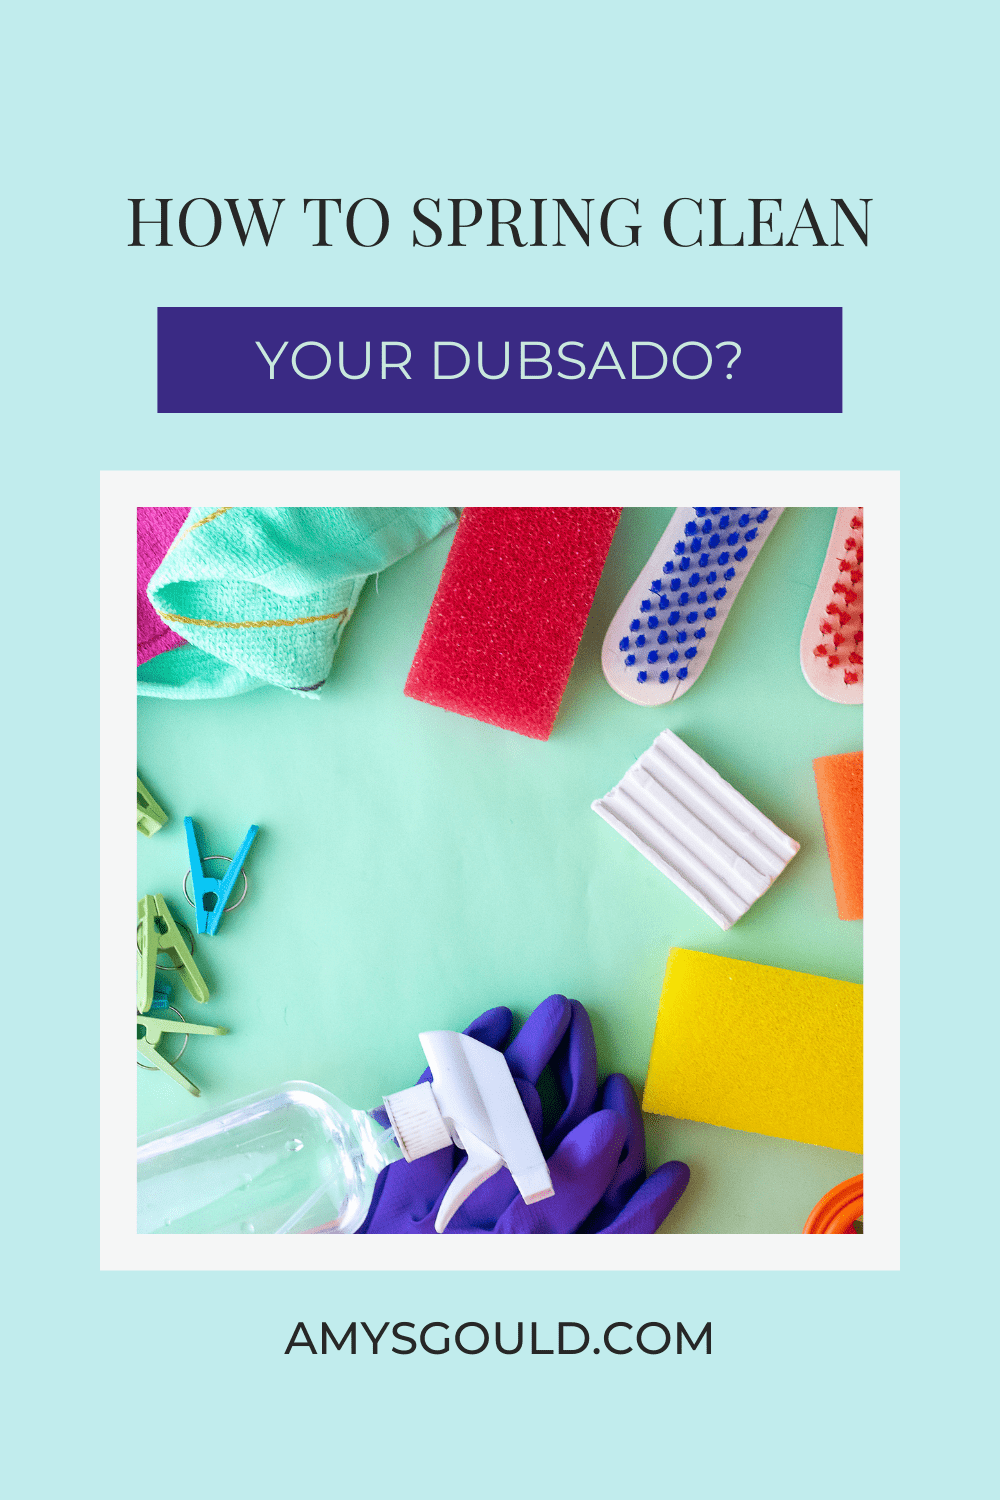 How to Spring Clean Your Dubsado